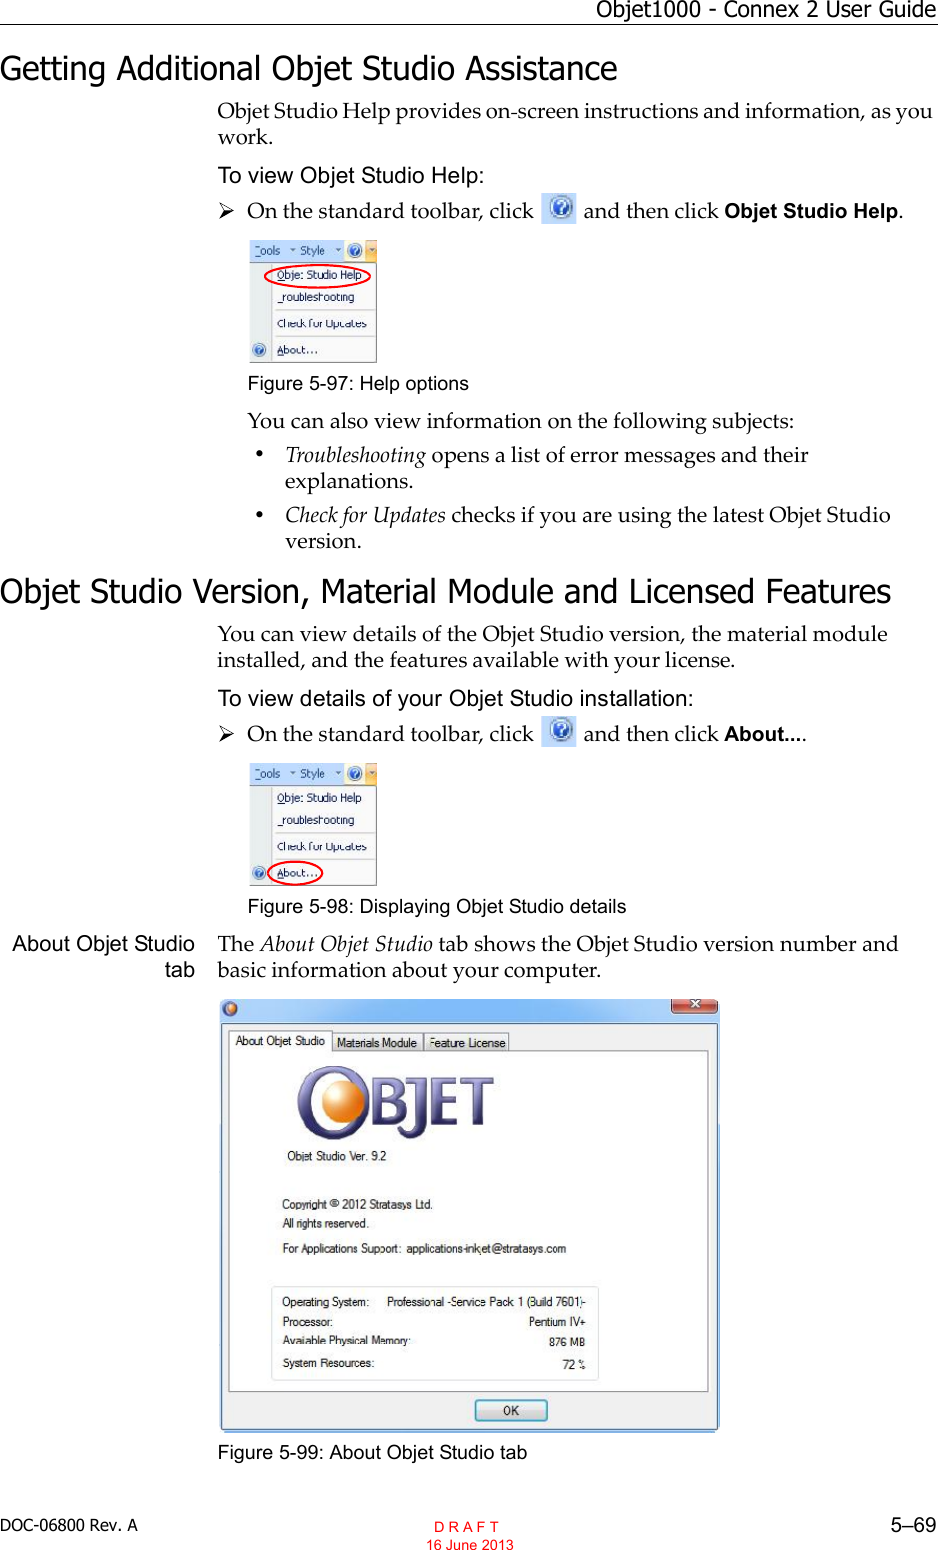 DOC-06800 Rev. A 5–69Objet1000 - Connex 2 User GuideGetting Additional Objet Studio AssistanceObjet Studio Help provides on screen instructions and information, as youwork.To view Objet Studio Help:On the standard toolbar, click and then click Objet Studio Help.Figure 5-97: Help optionsYou can also view information on the following subjects:•Troubleshooting opens a list of error messages and theirexplanations.•Check for Updates checks if you are using the latest Objet Studioversion.Objet Studio Version, Material Module and Licensed FeaturesYou can view details of the Objet Studio version, the material moduleinstalled, and the features available with your license.To view details of your Objet Studio installation:On the standard toolbar, click and then click About....Figure 5-98: Displaying Objet Studio detailsAbout Objet StudiotabThe About Objet Studio tab shows the Objet Studio version number andbasic information about your computer.Figure 5-99: About Objet Studio tab  D R A F T 16 June 2013